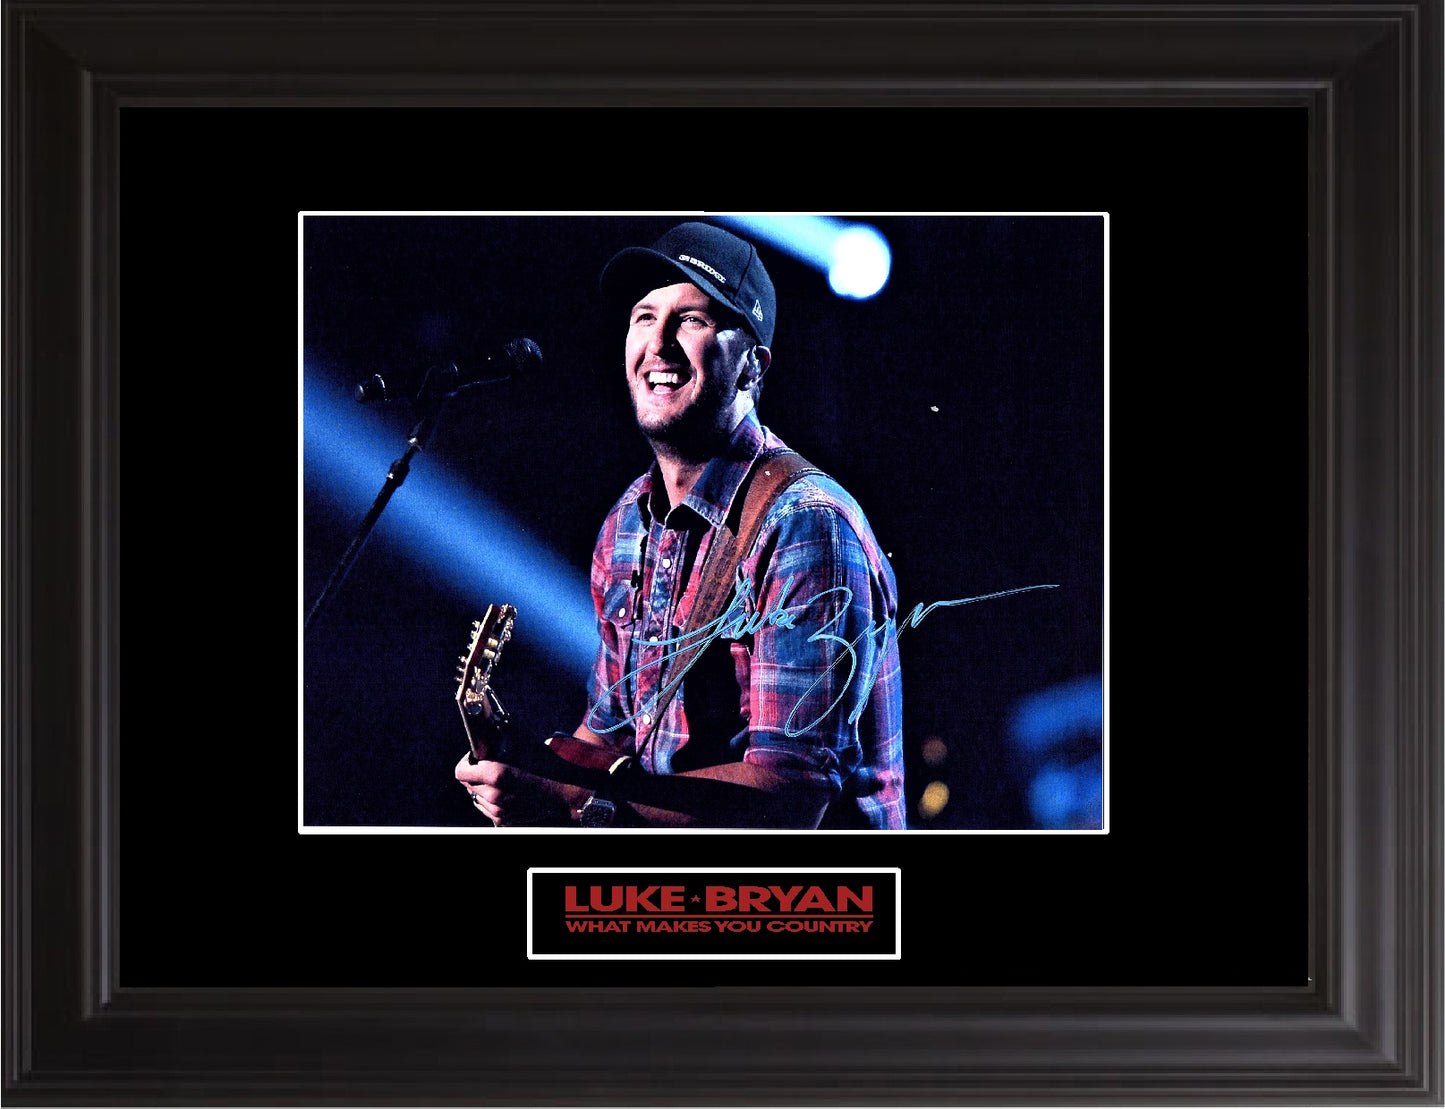 Luke Bryan Autographed Photo - Zion Graphic Collectibles